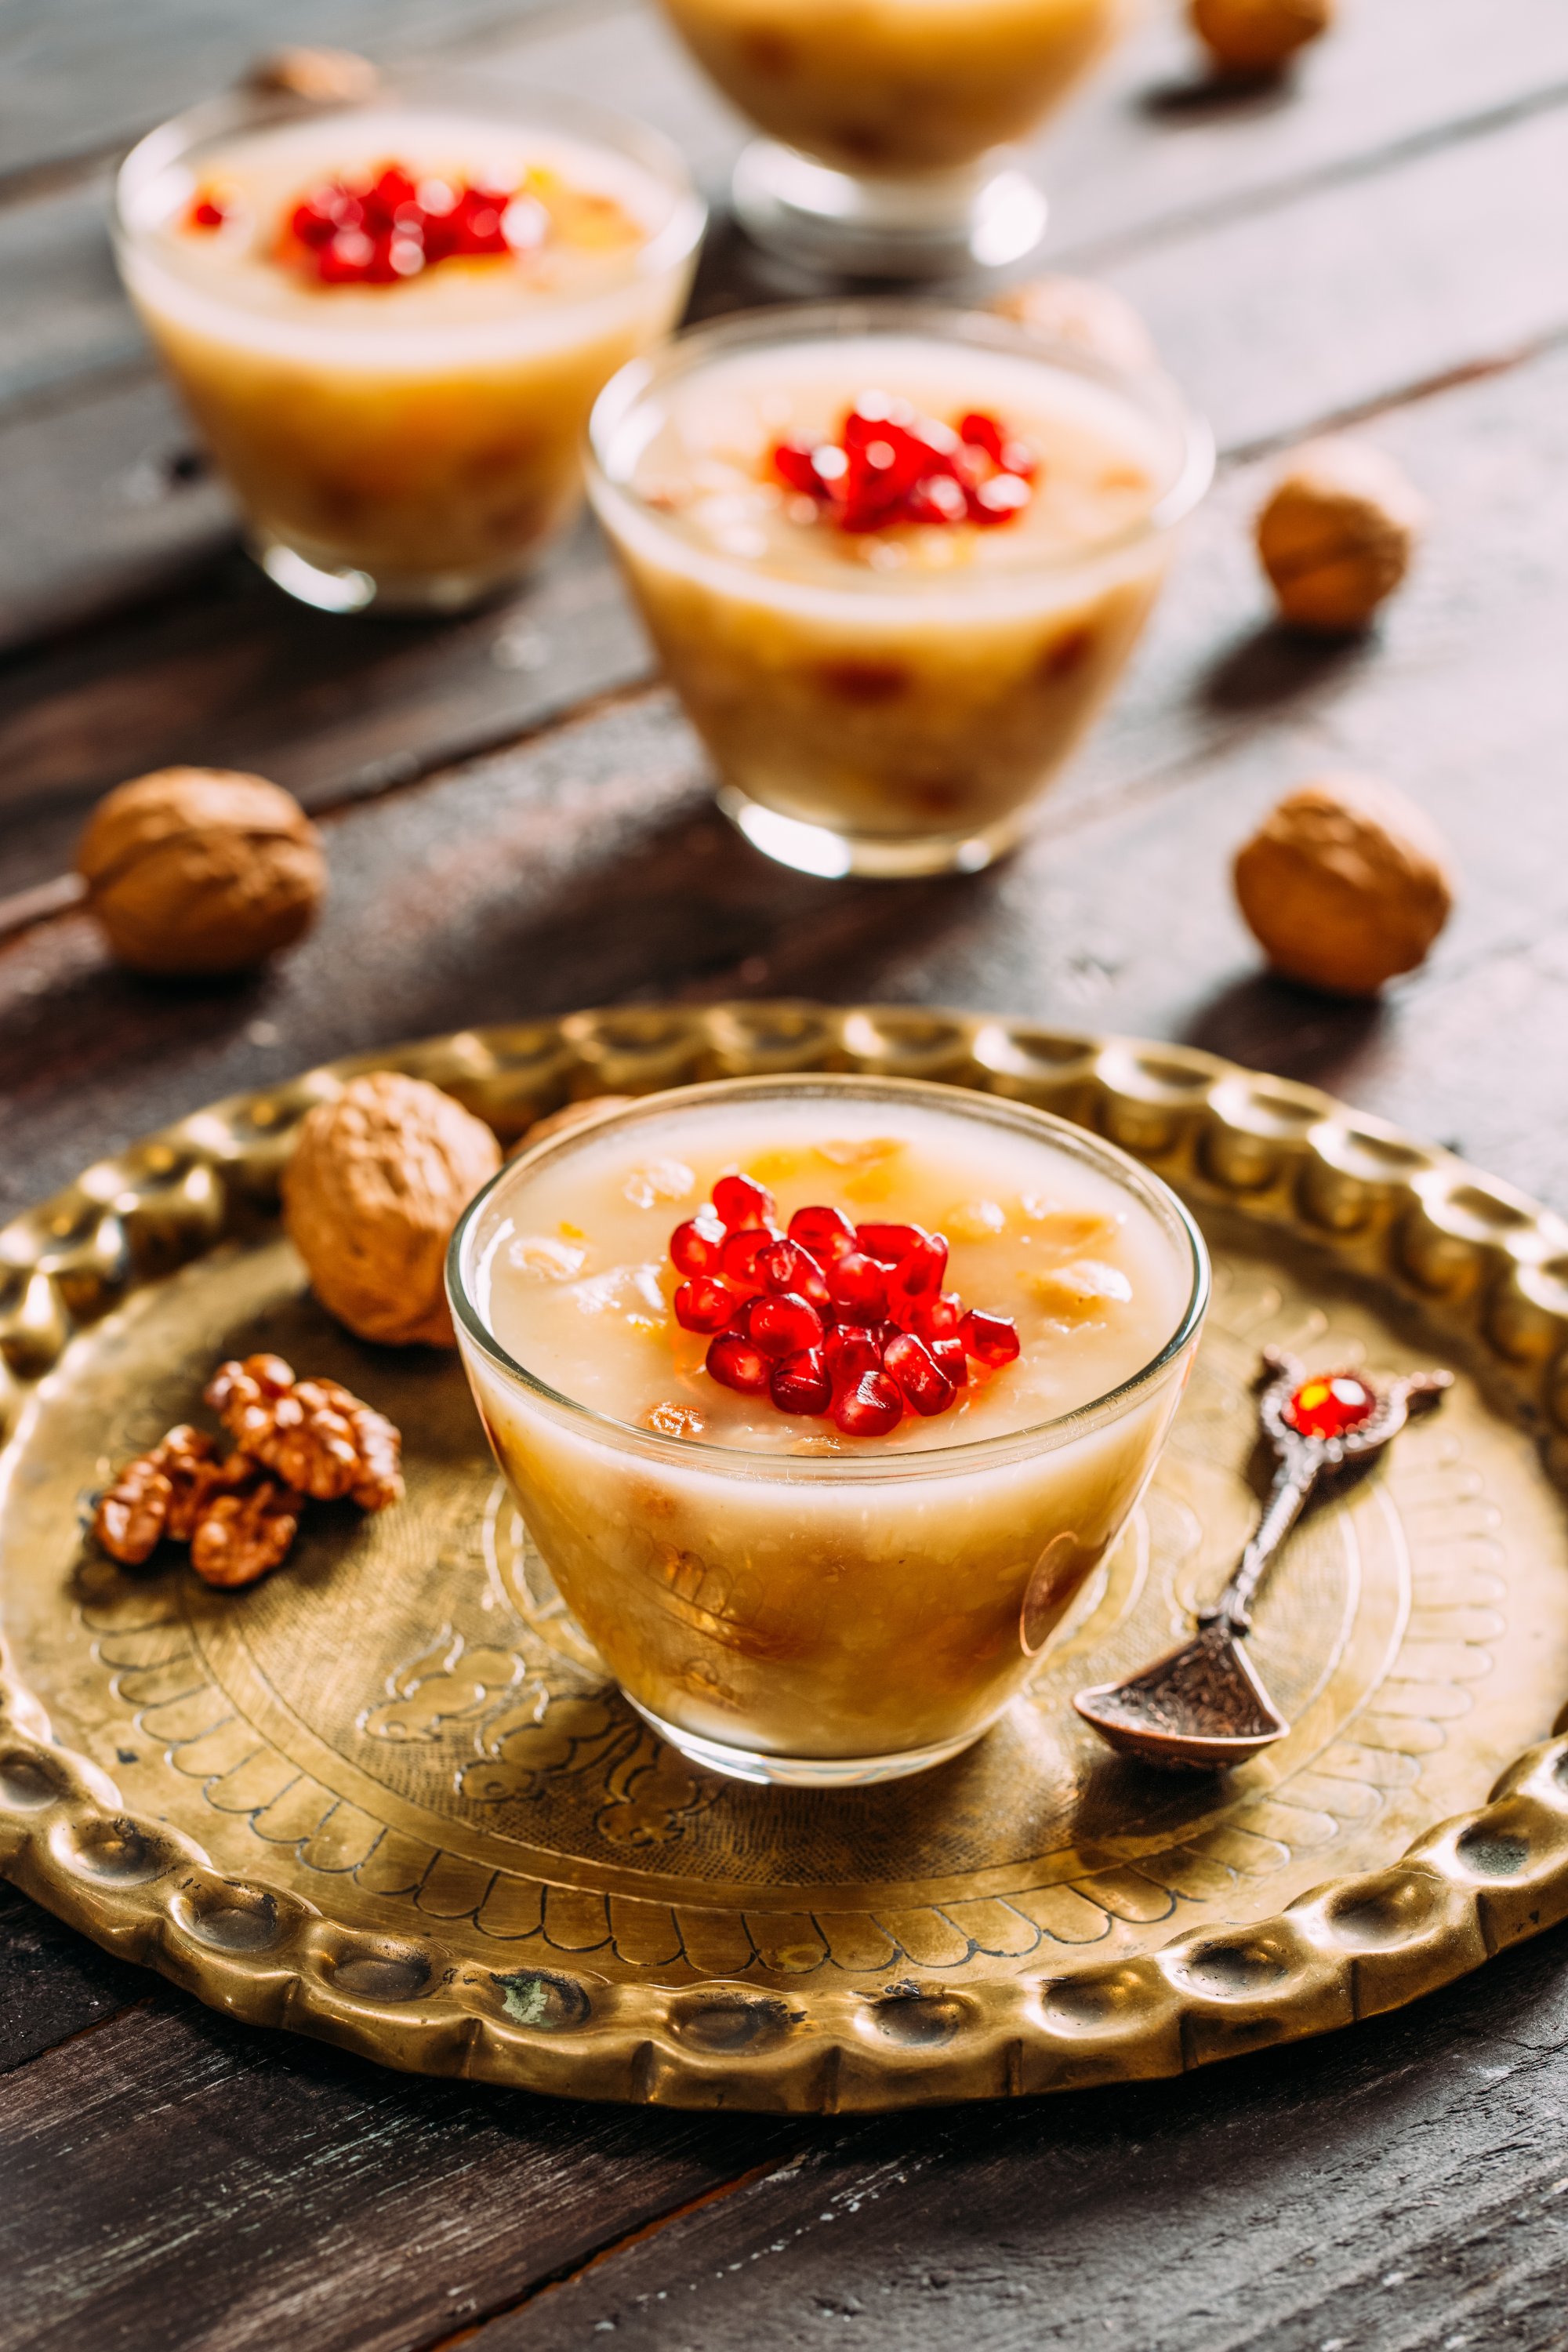 Did you know that Ashura (aşure) is also called Noah's pudding? (Shutterstock Photo)